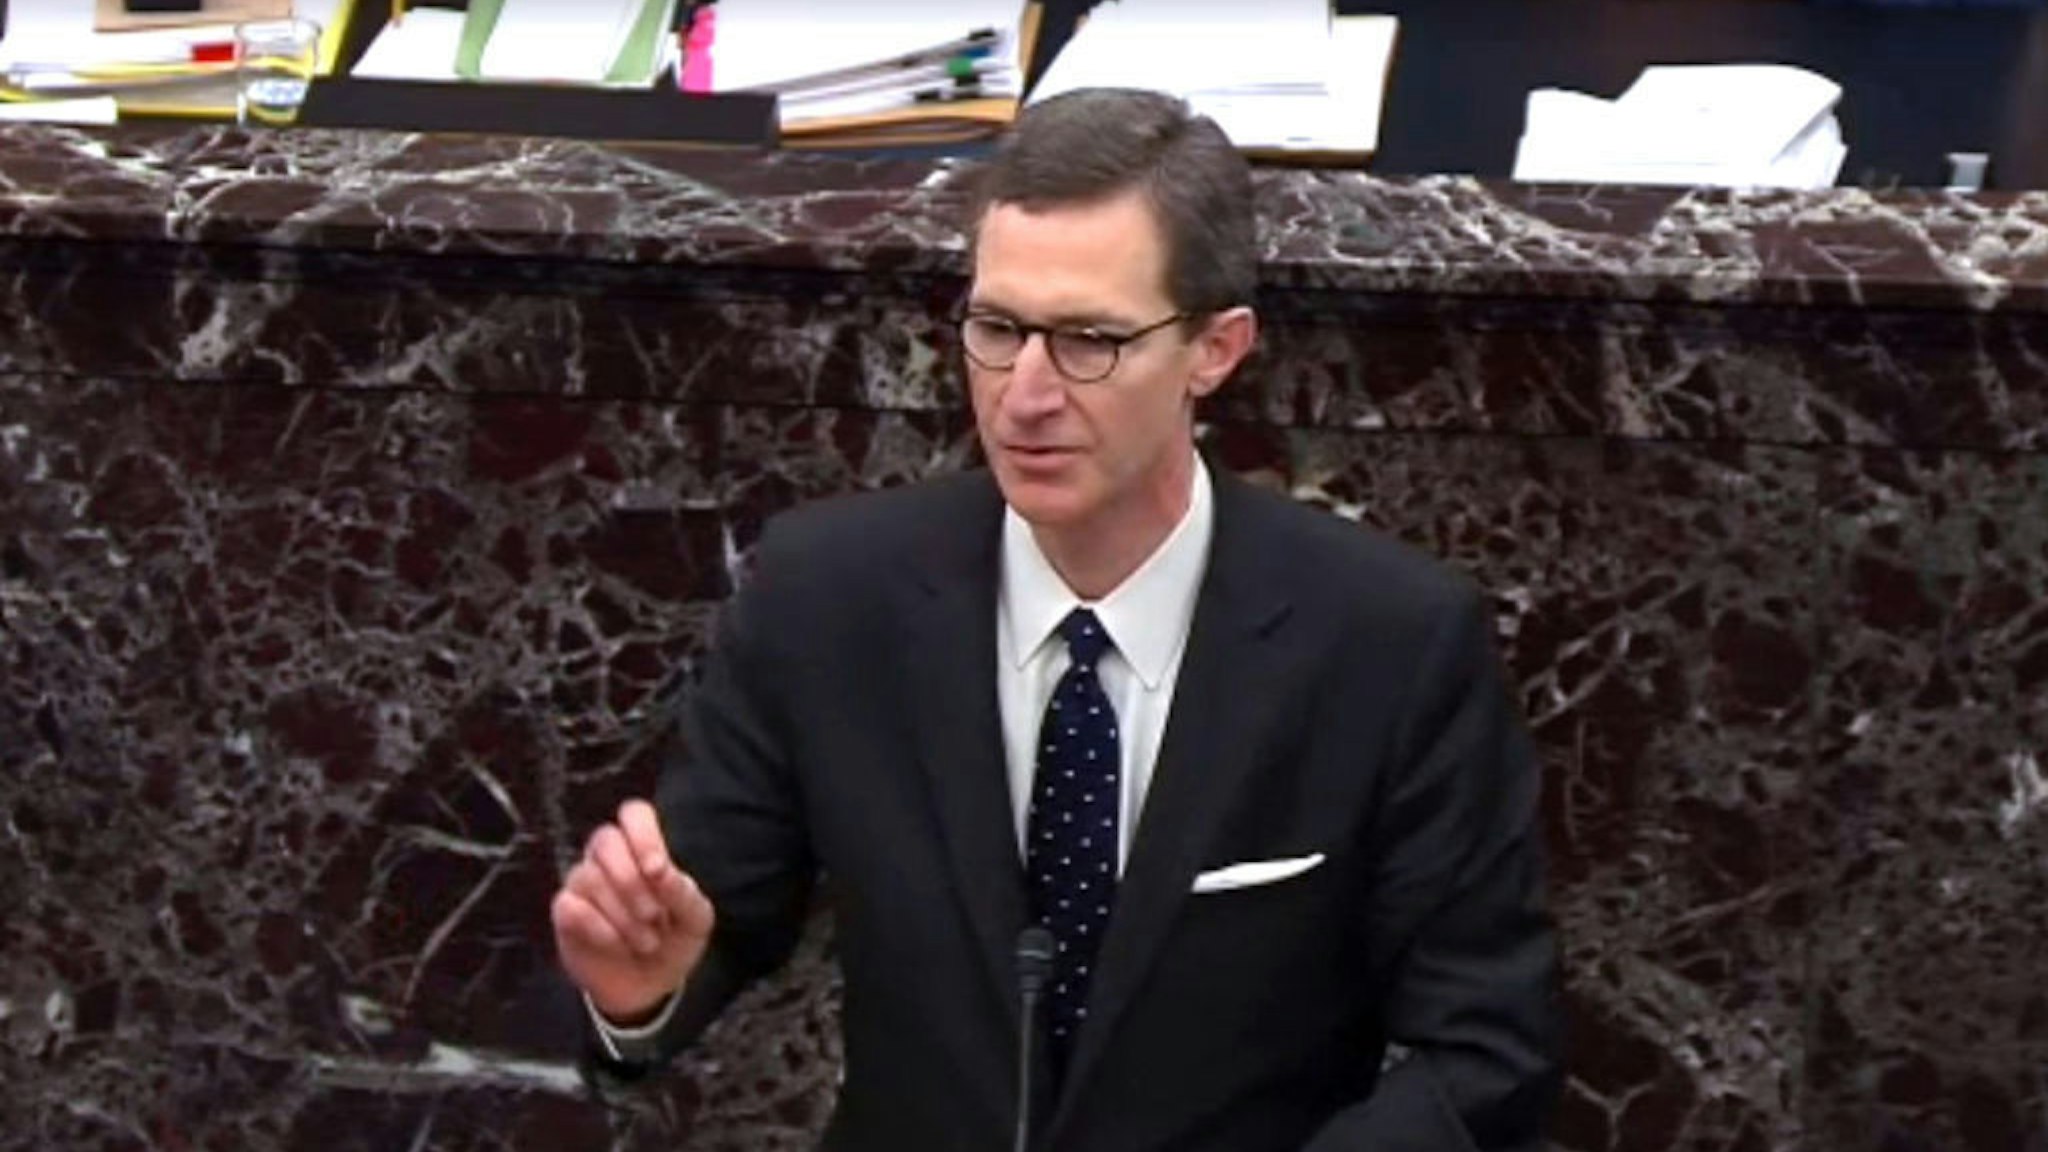 In this screengrab taken from a Senate Television webcast, XXX speaks during impeachment proceedings against U.S. President Donald Trump in the Senate at the U.S. Capitol on January 25, 2020 in Washington, DC. Democratic House managers concluded their opening arguments on Friday and President Trump’s lawyers will begin presenting their defense. (Photo by Senate Television via Getty Images)